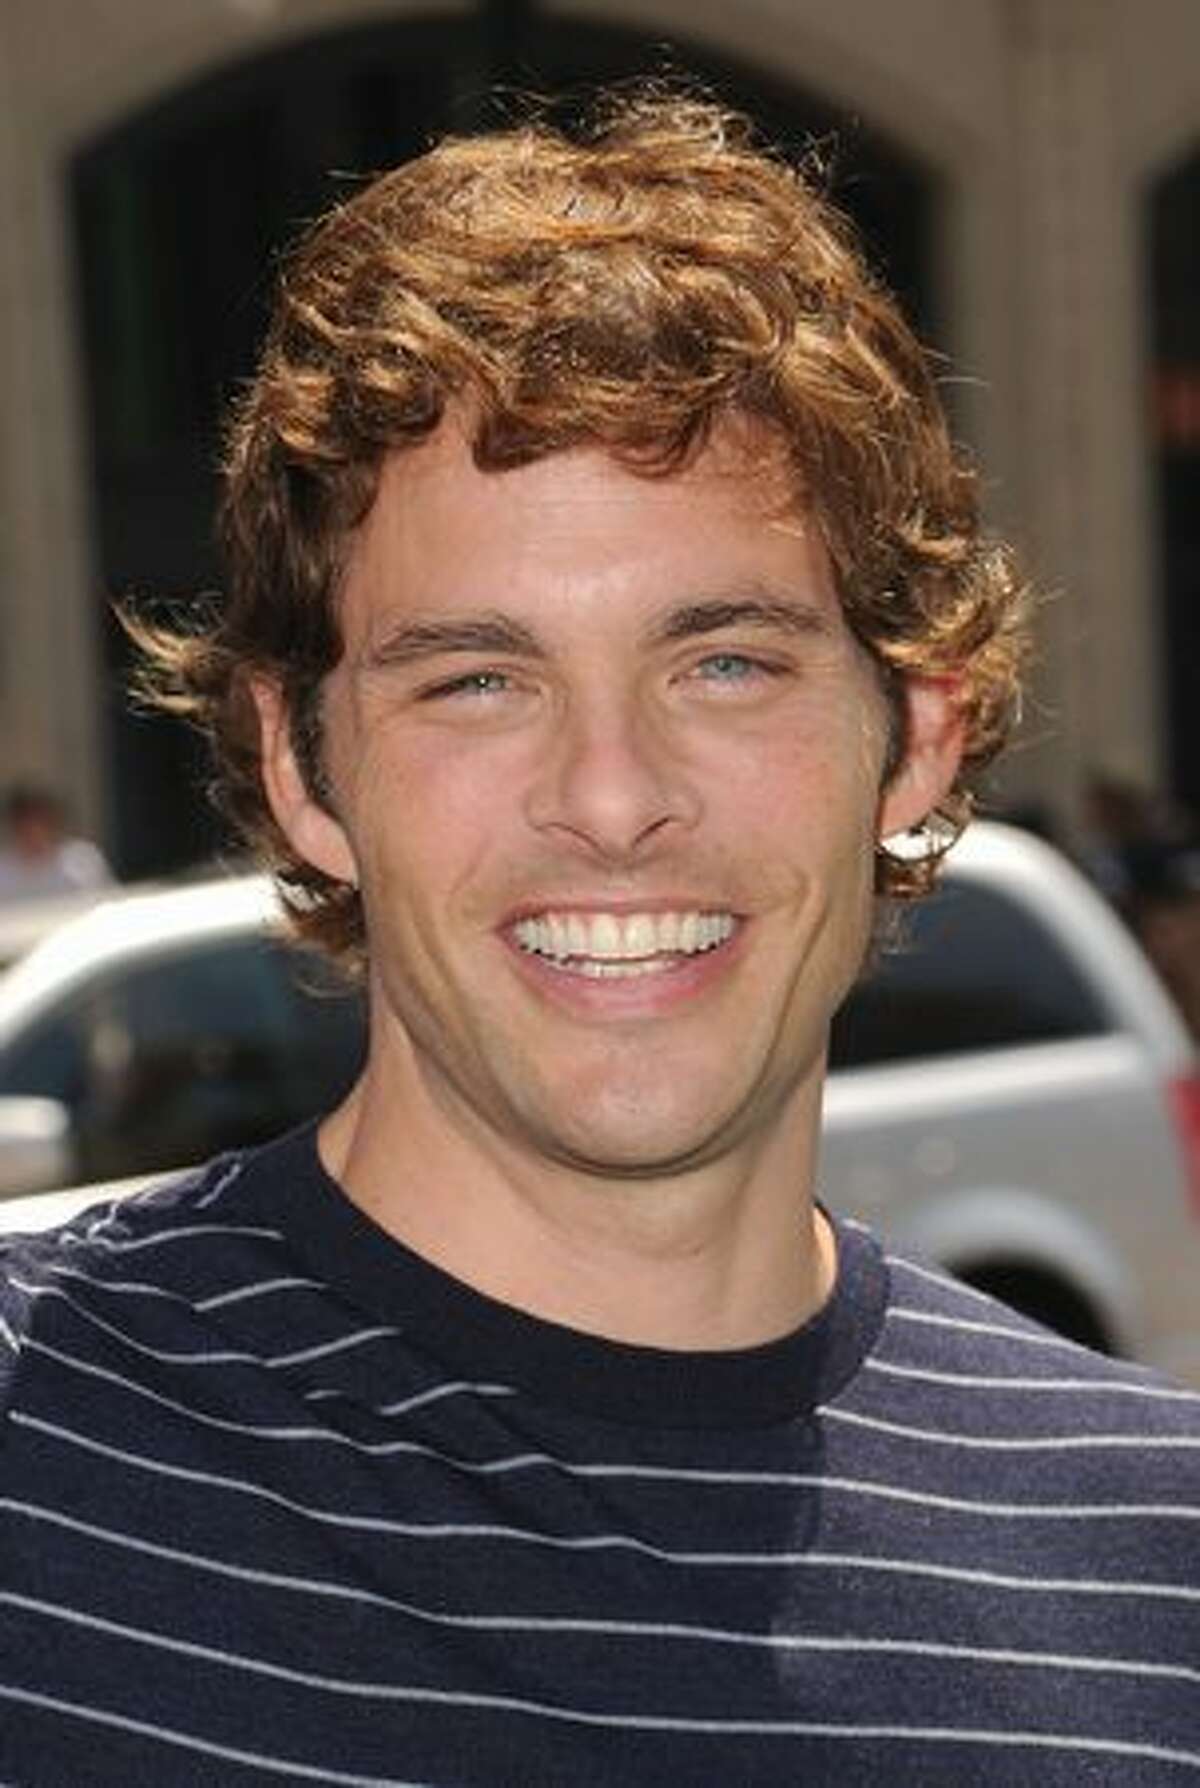 Actor James Marsden arrives at the premiere of Warner Bros. "Cats And Dogs 2" in Hollywood.